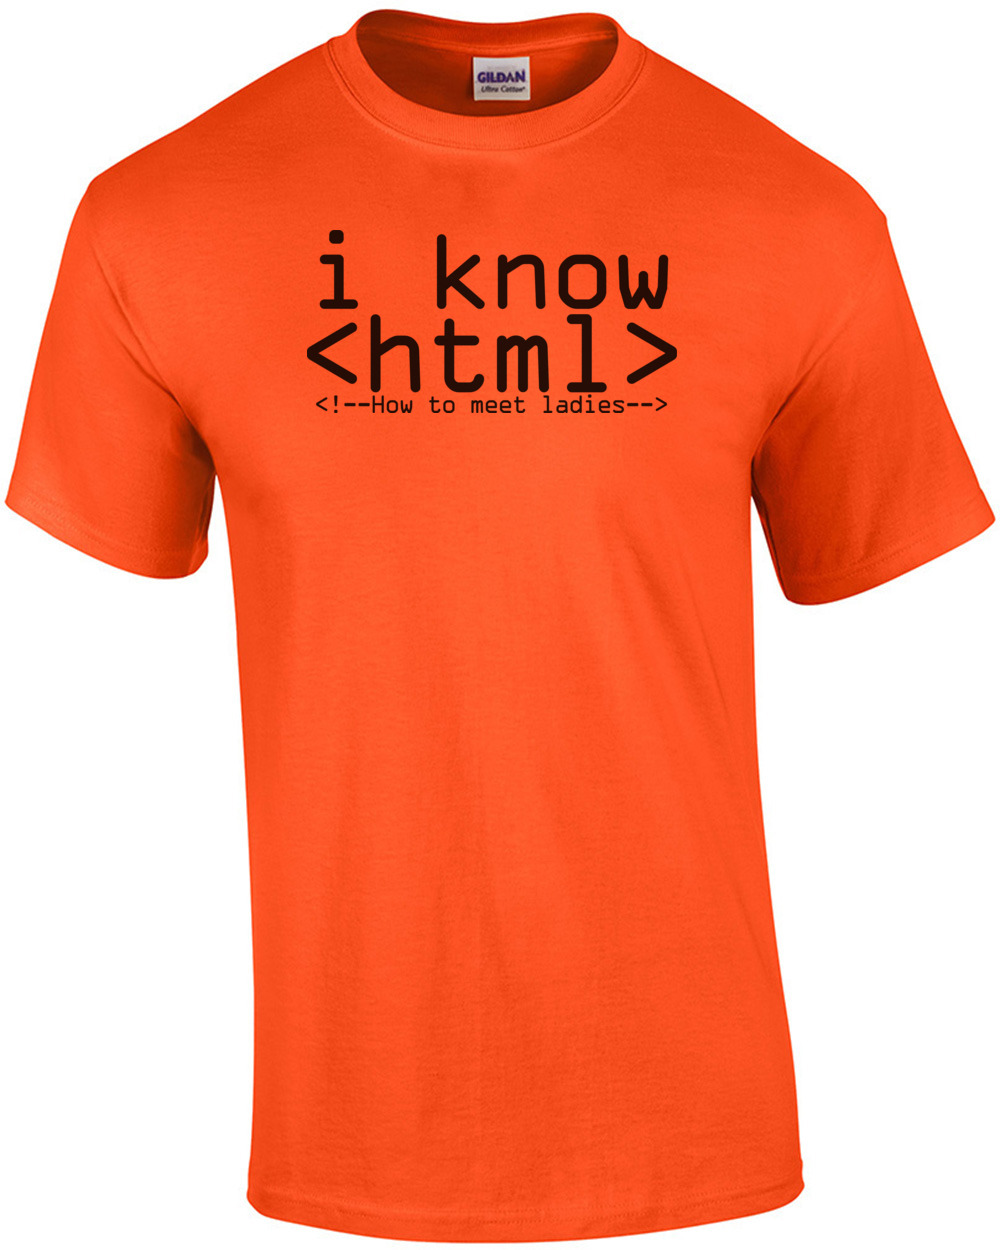 I Know HTML T-shirt Silicon Valley Funny Geeky T-shirts Adult 